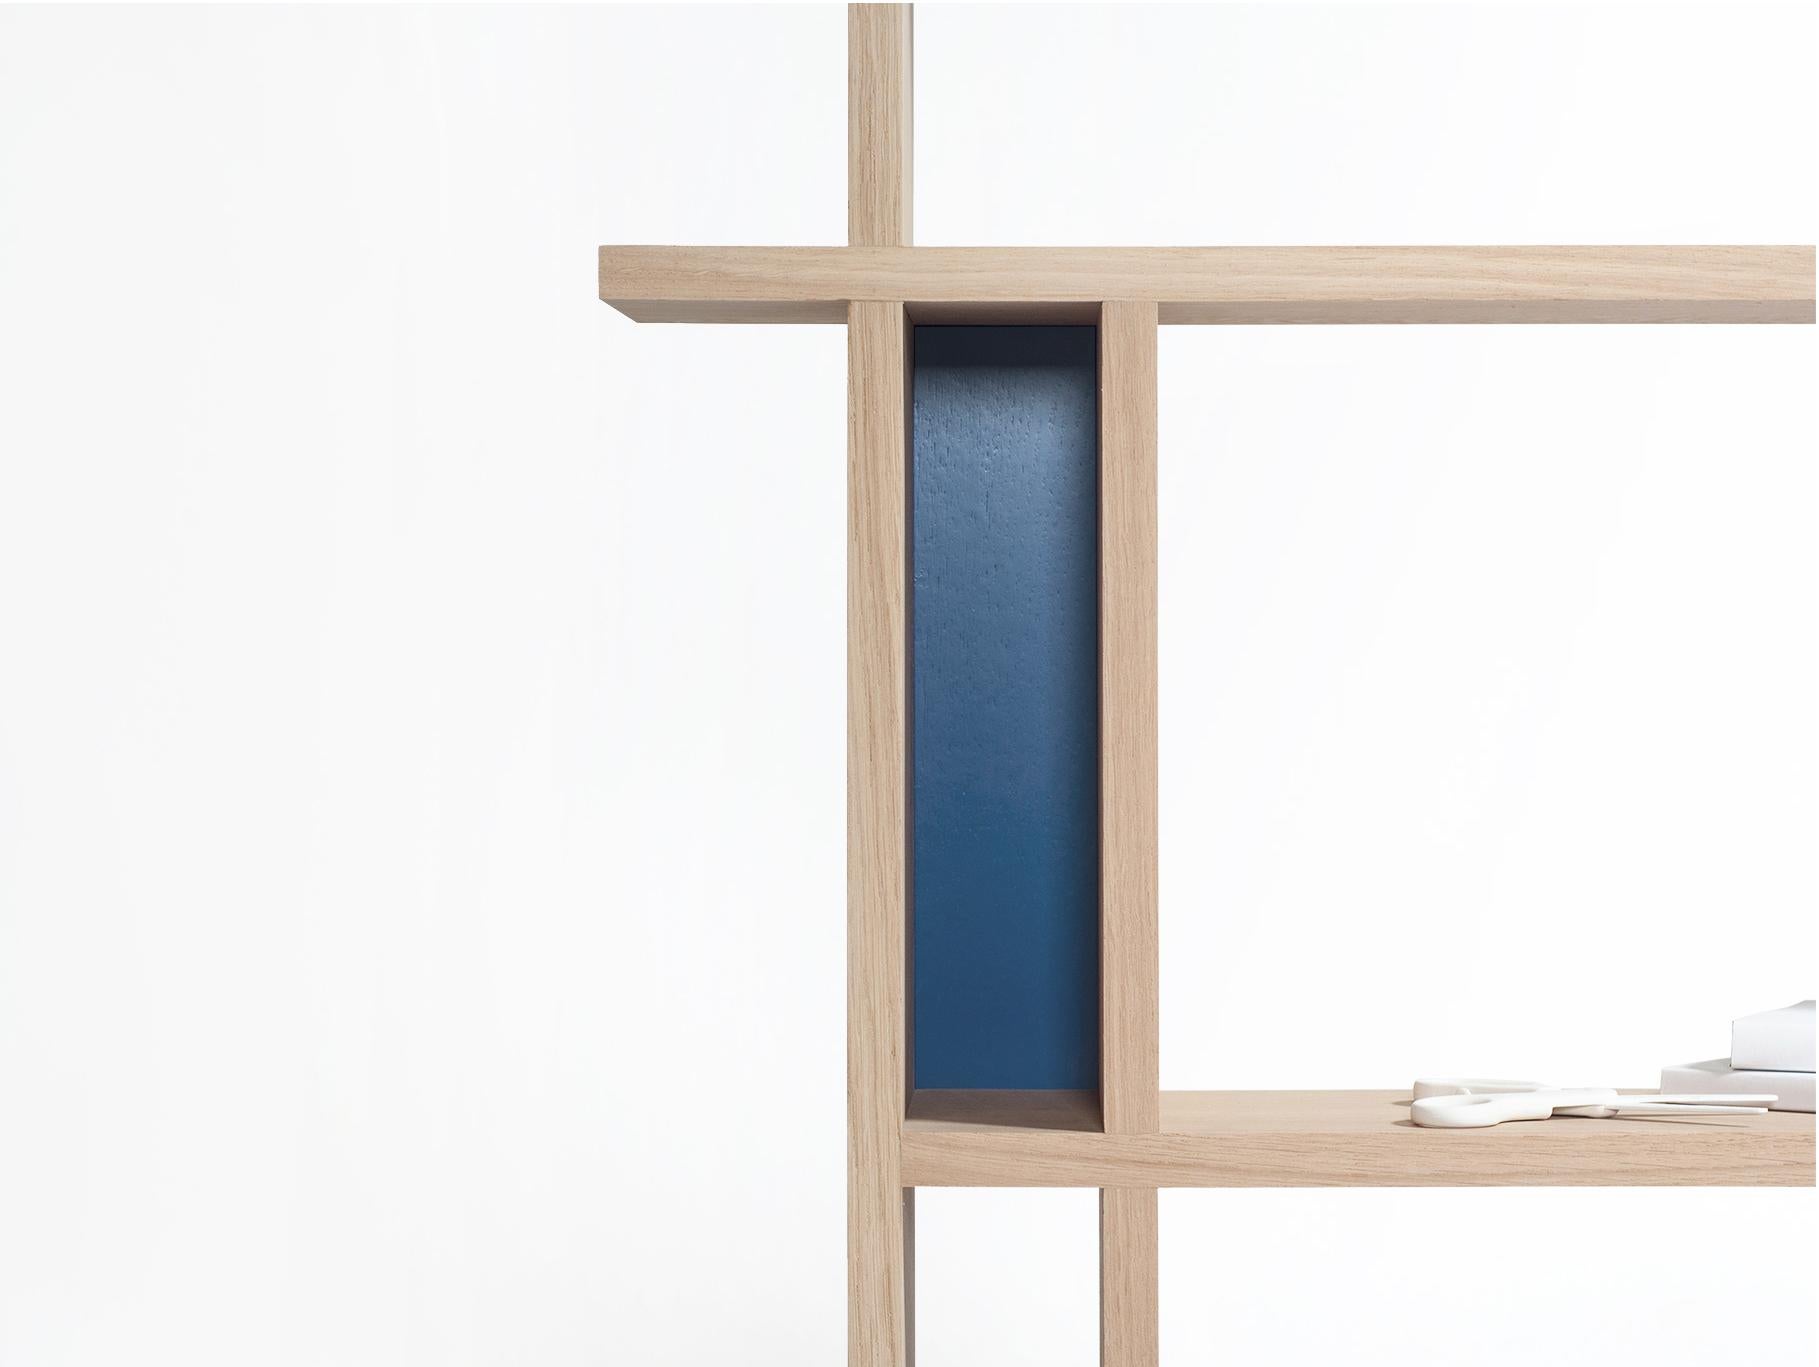 Ethereal lines, with some touches of colors, the RESO bookcase seems to be uncompleted. The lines of its connections offer a lot of functionality to display artefacts or store books, magazines, etc…
100% solid oak from sustainable French forests.